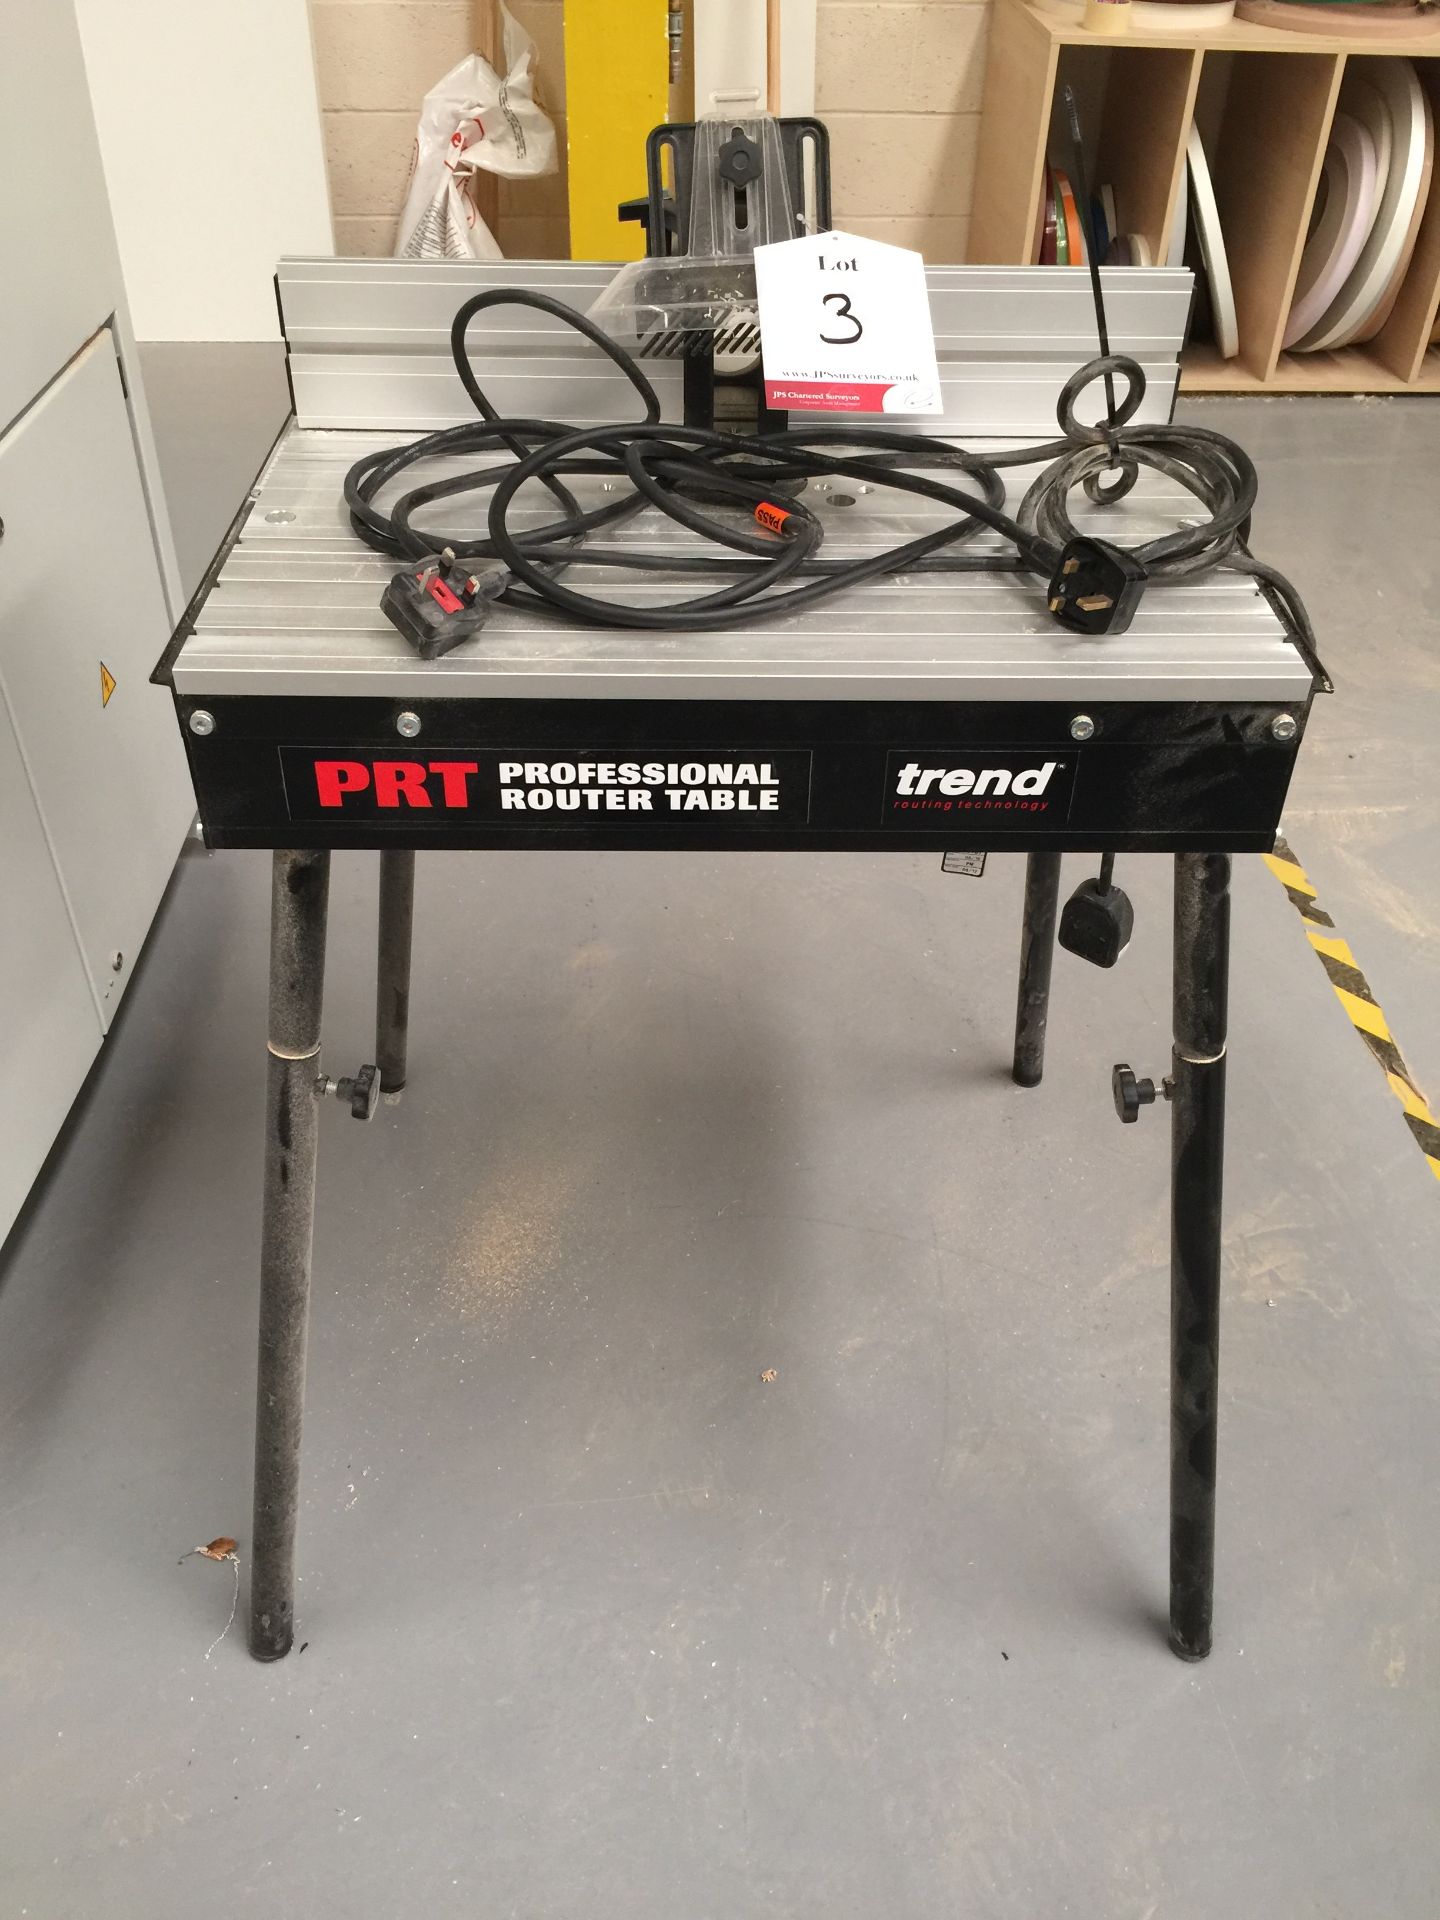 Trend Professional Router Table | Model: PRT | Record Power: RPR 400 - Image 2 of 2